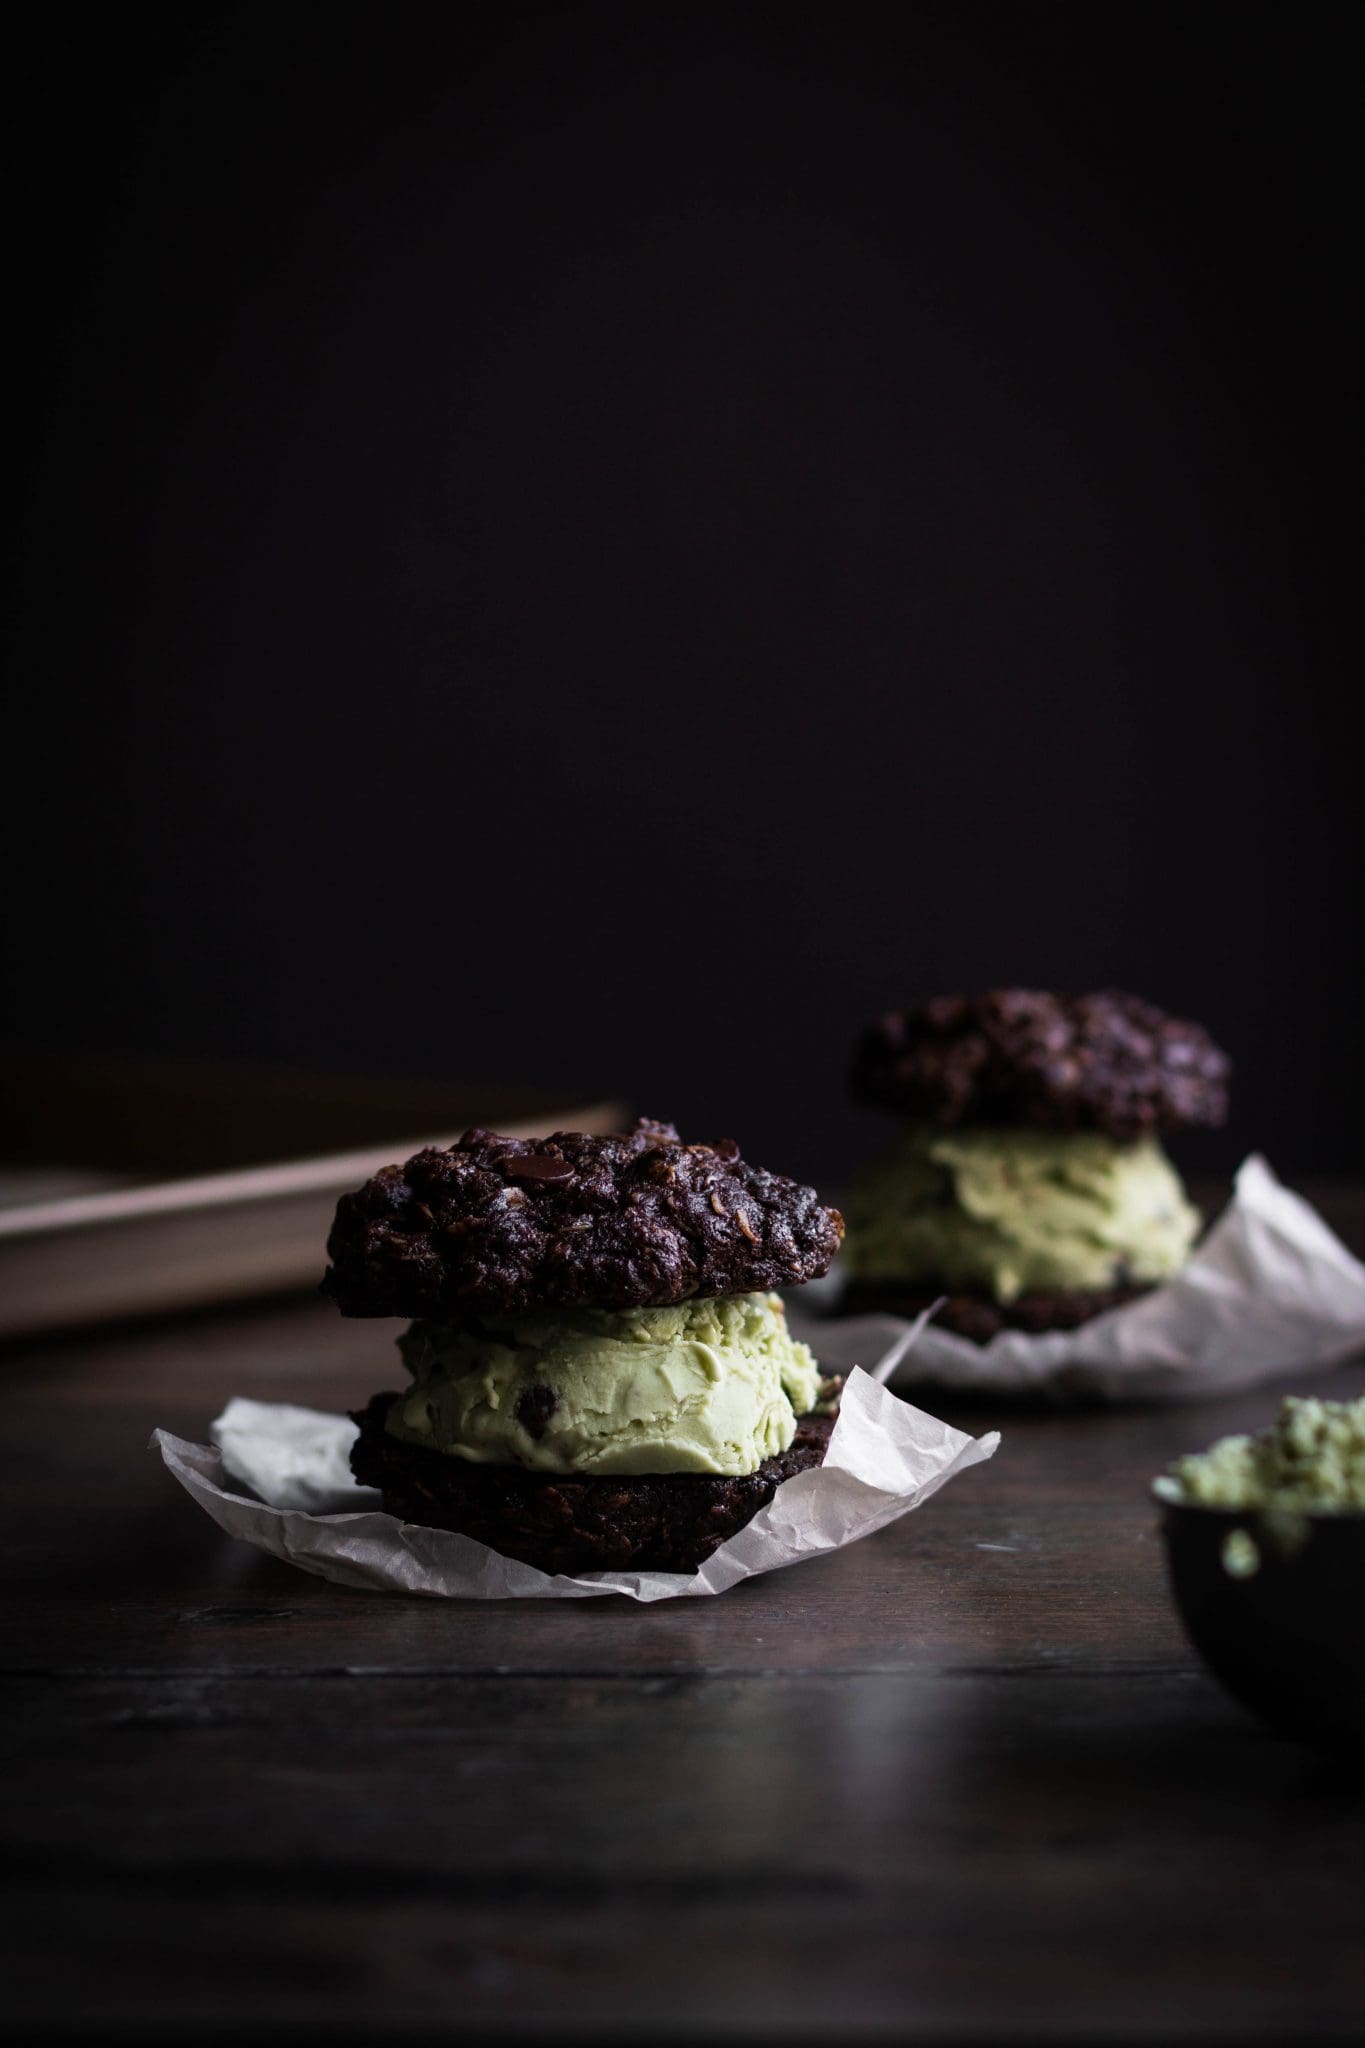 mint chocolate ice cream sandwiches from the side